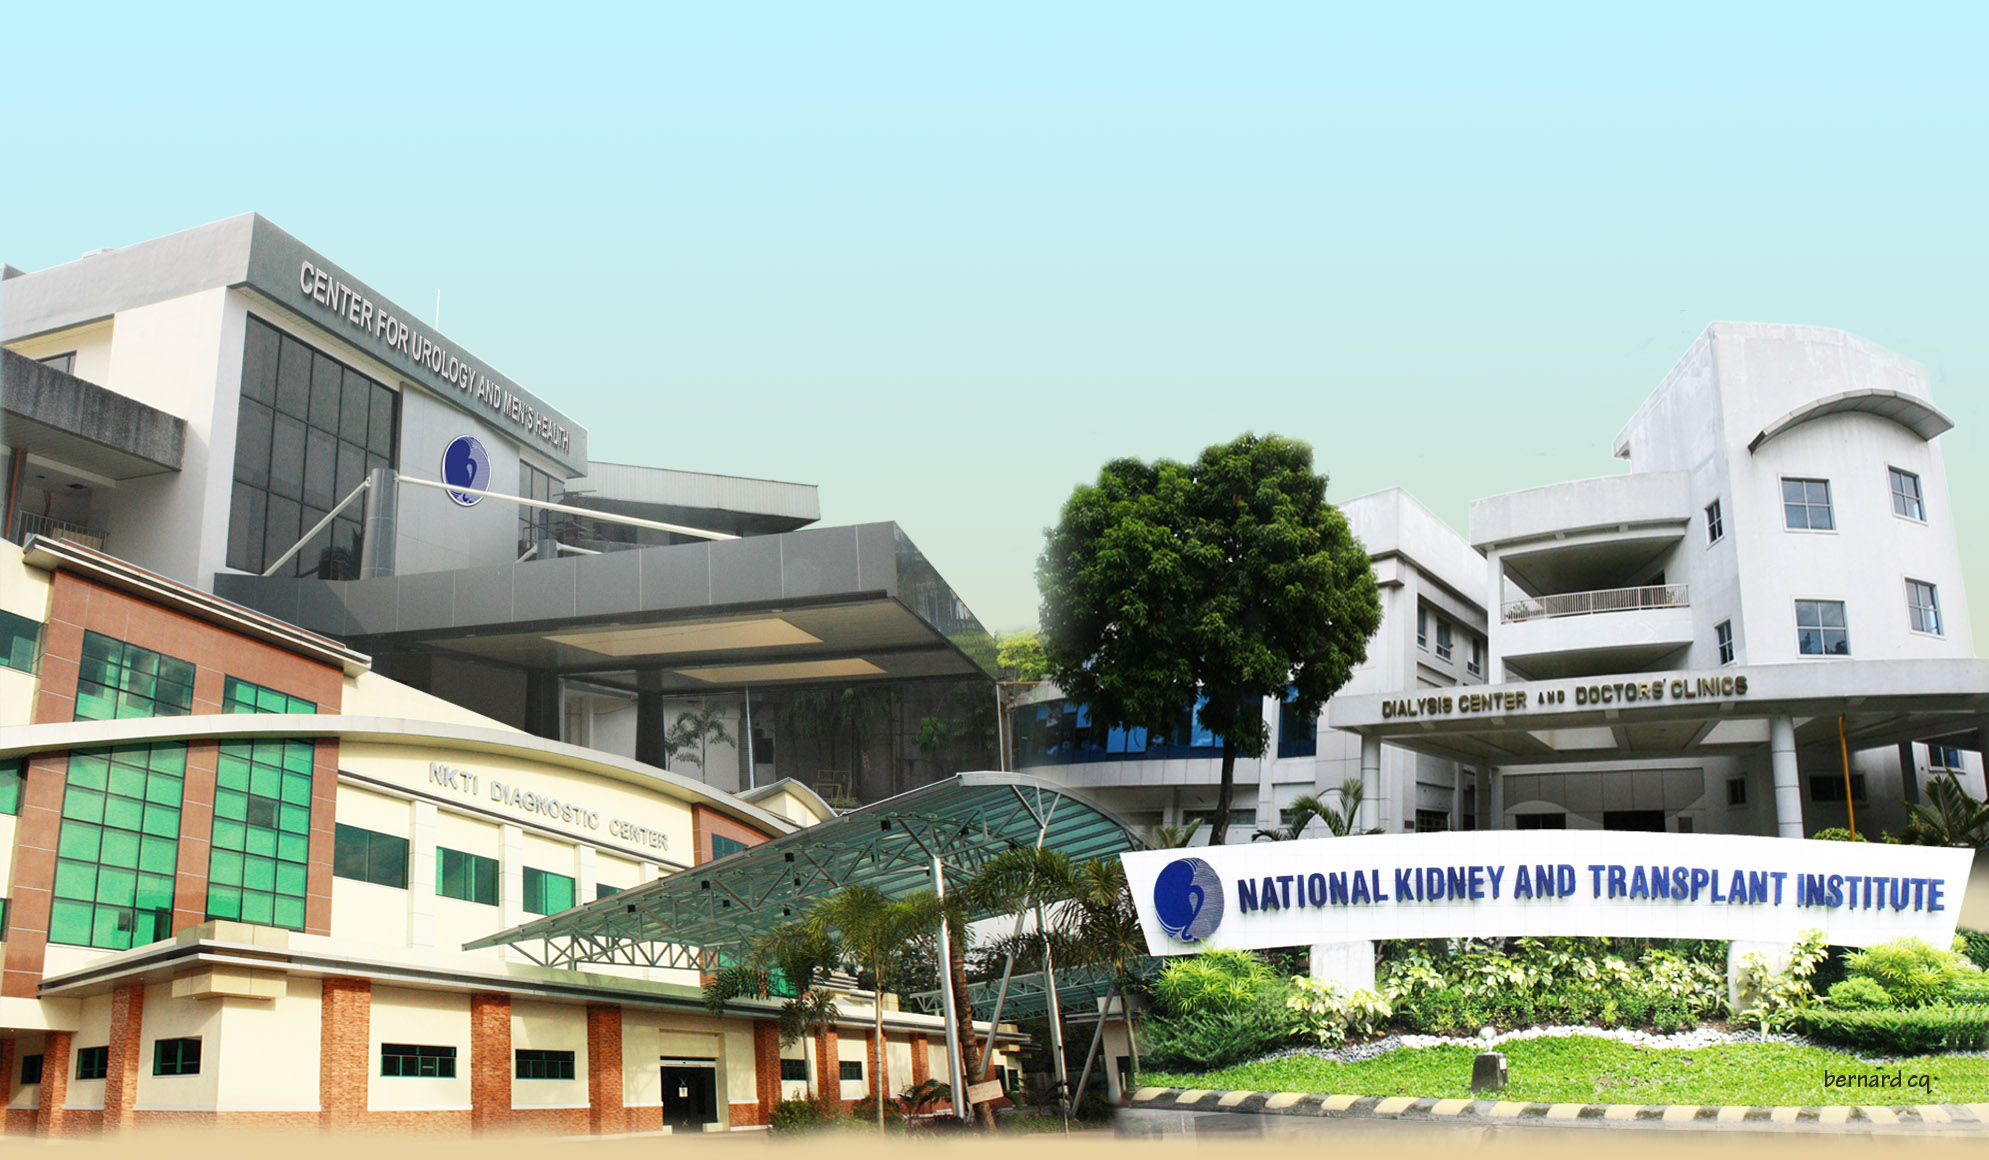 The National Kidney and Transplant Institute (NKTI) on Tuesday said it is conducting its own investigation on alleged cases of organ trafficking.